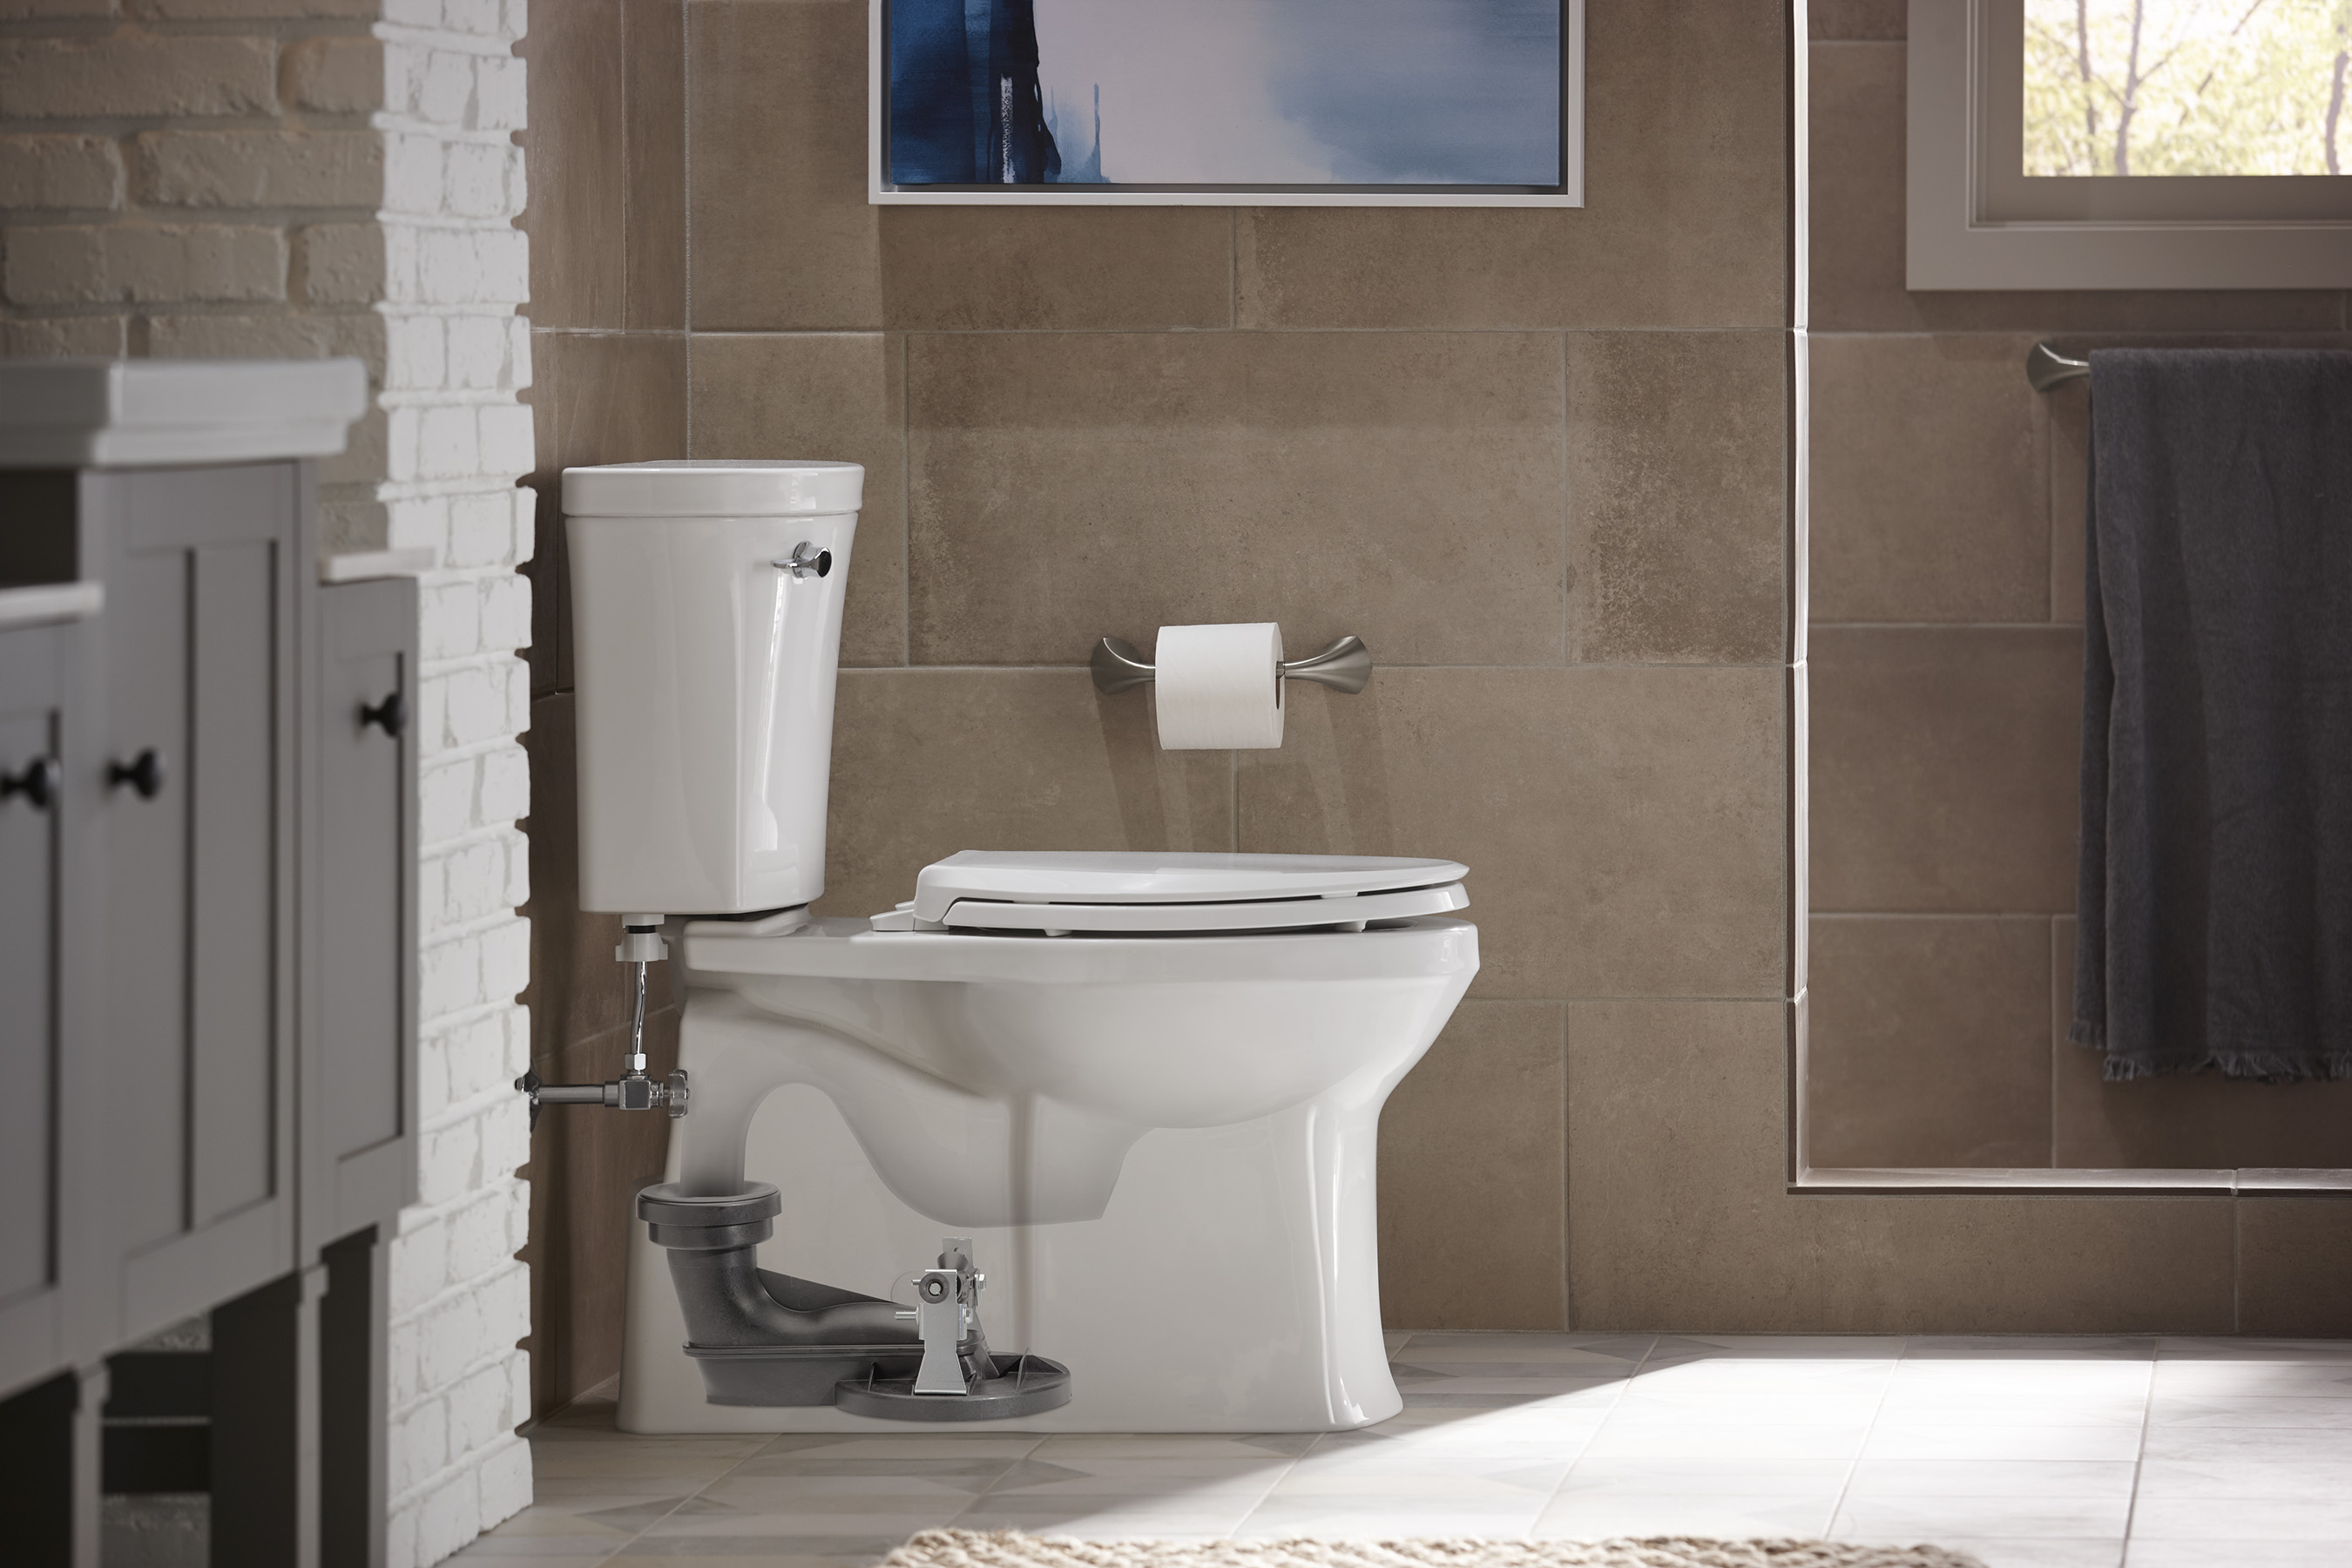 Kohler Corbelle toilet with Revolution 360 flush is powered by the AquaPiston canister technology which allows water to flow out of the tank at 360 degrees, increasing the power and effectiveness of the flush.